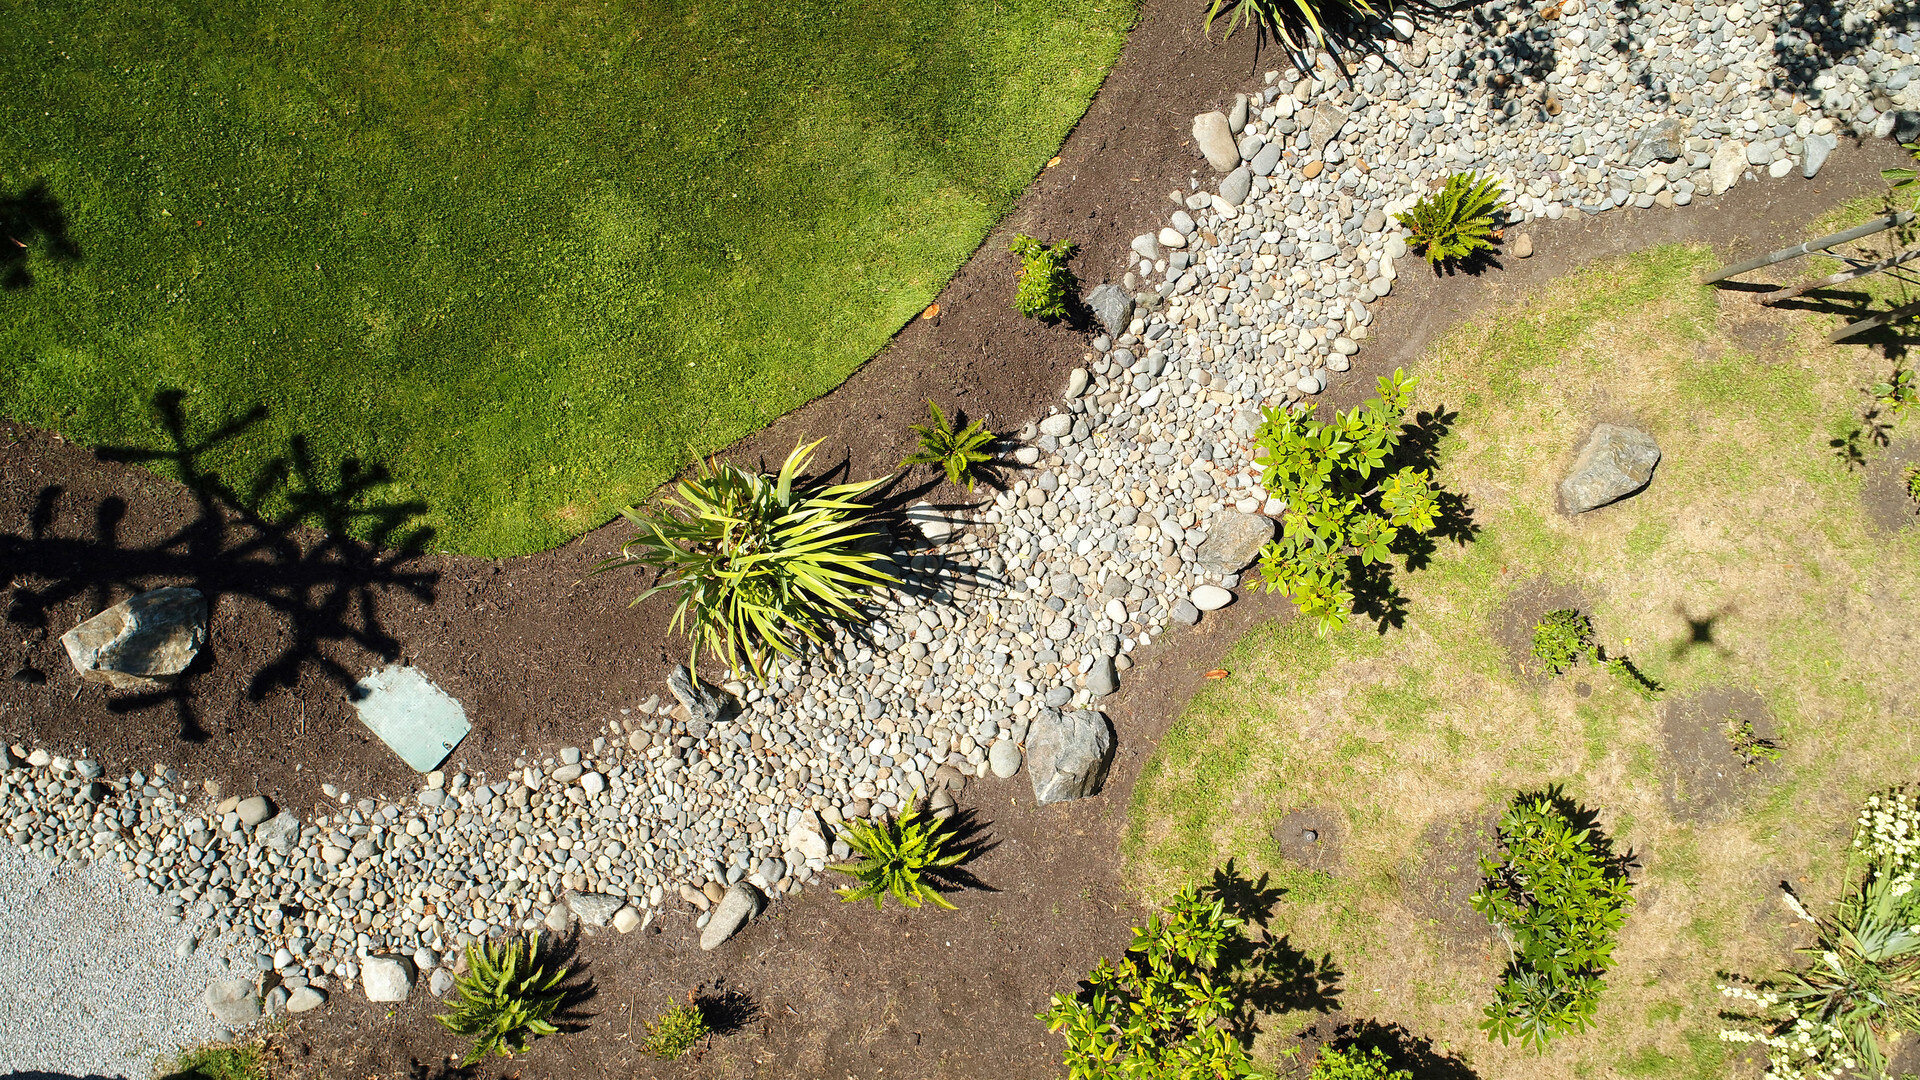 2-xeriscaping-dry-riverscaping-fern-drainage-aerial-landscape-photography.jpg